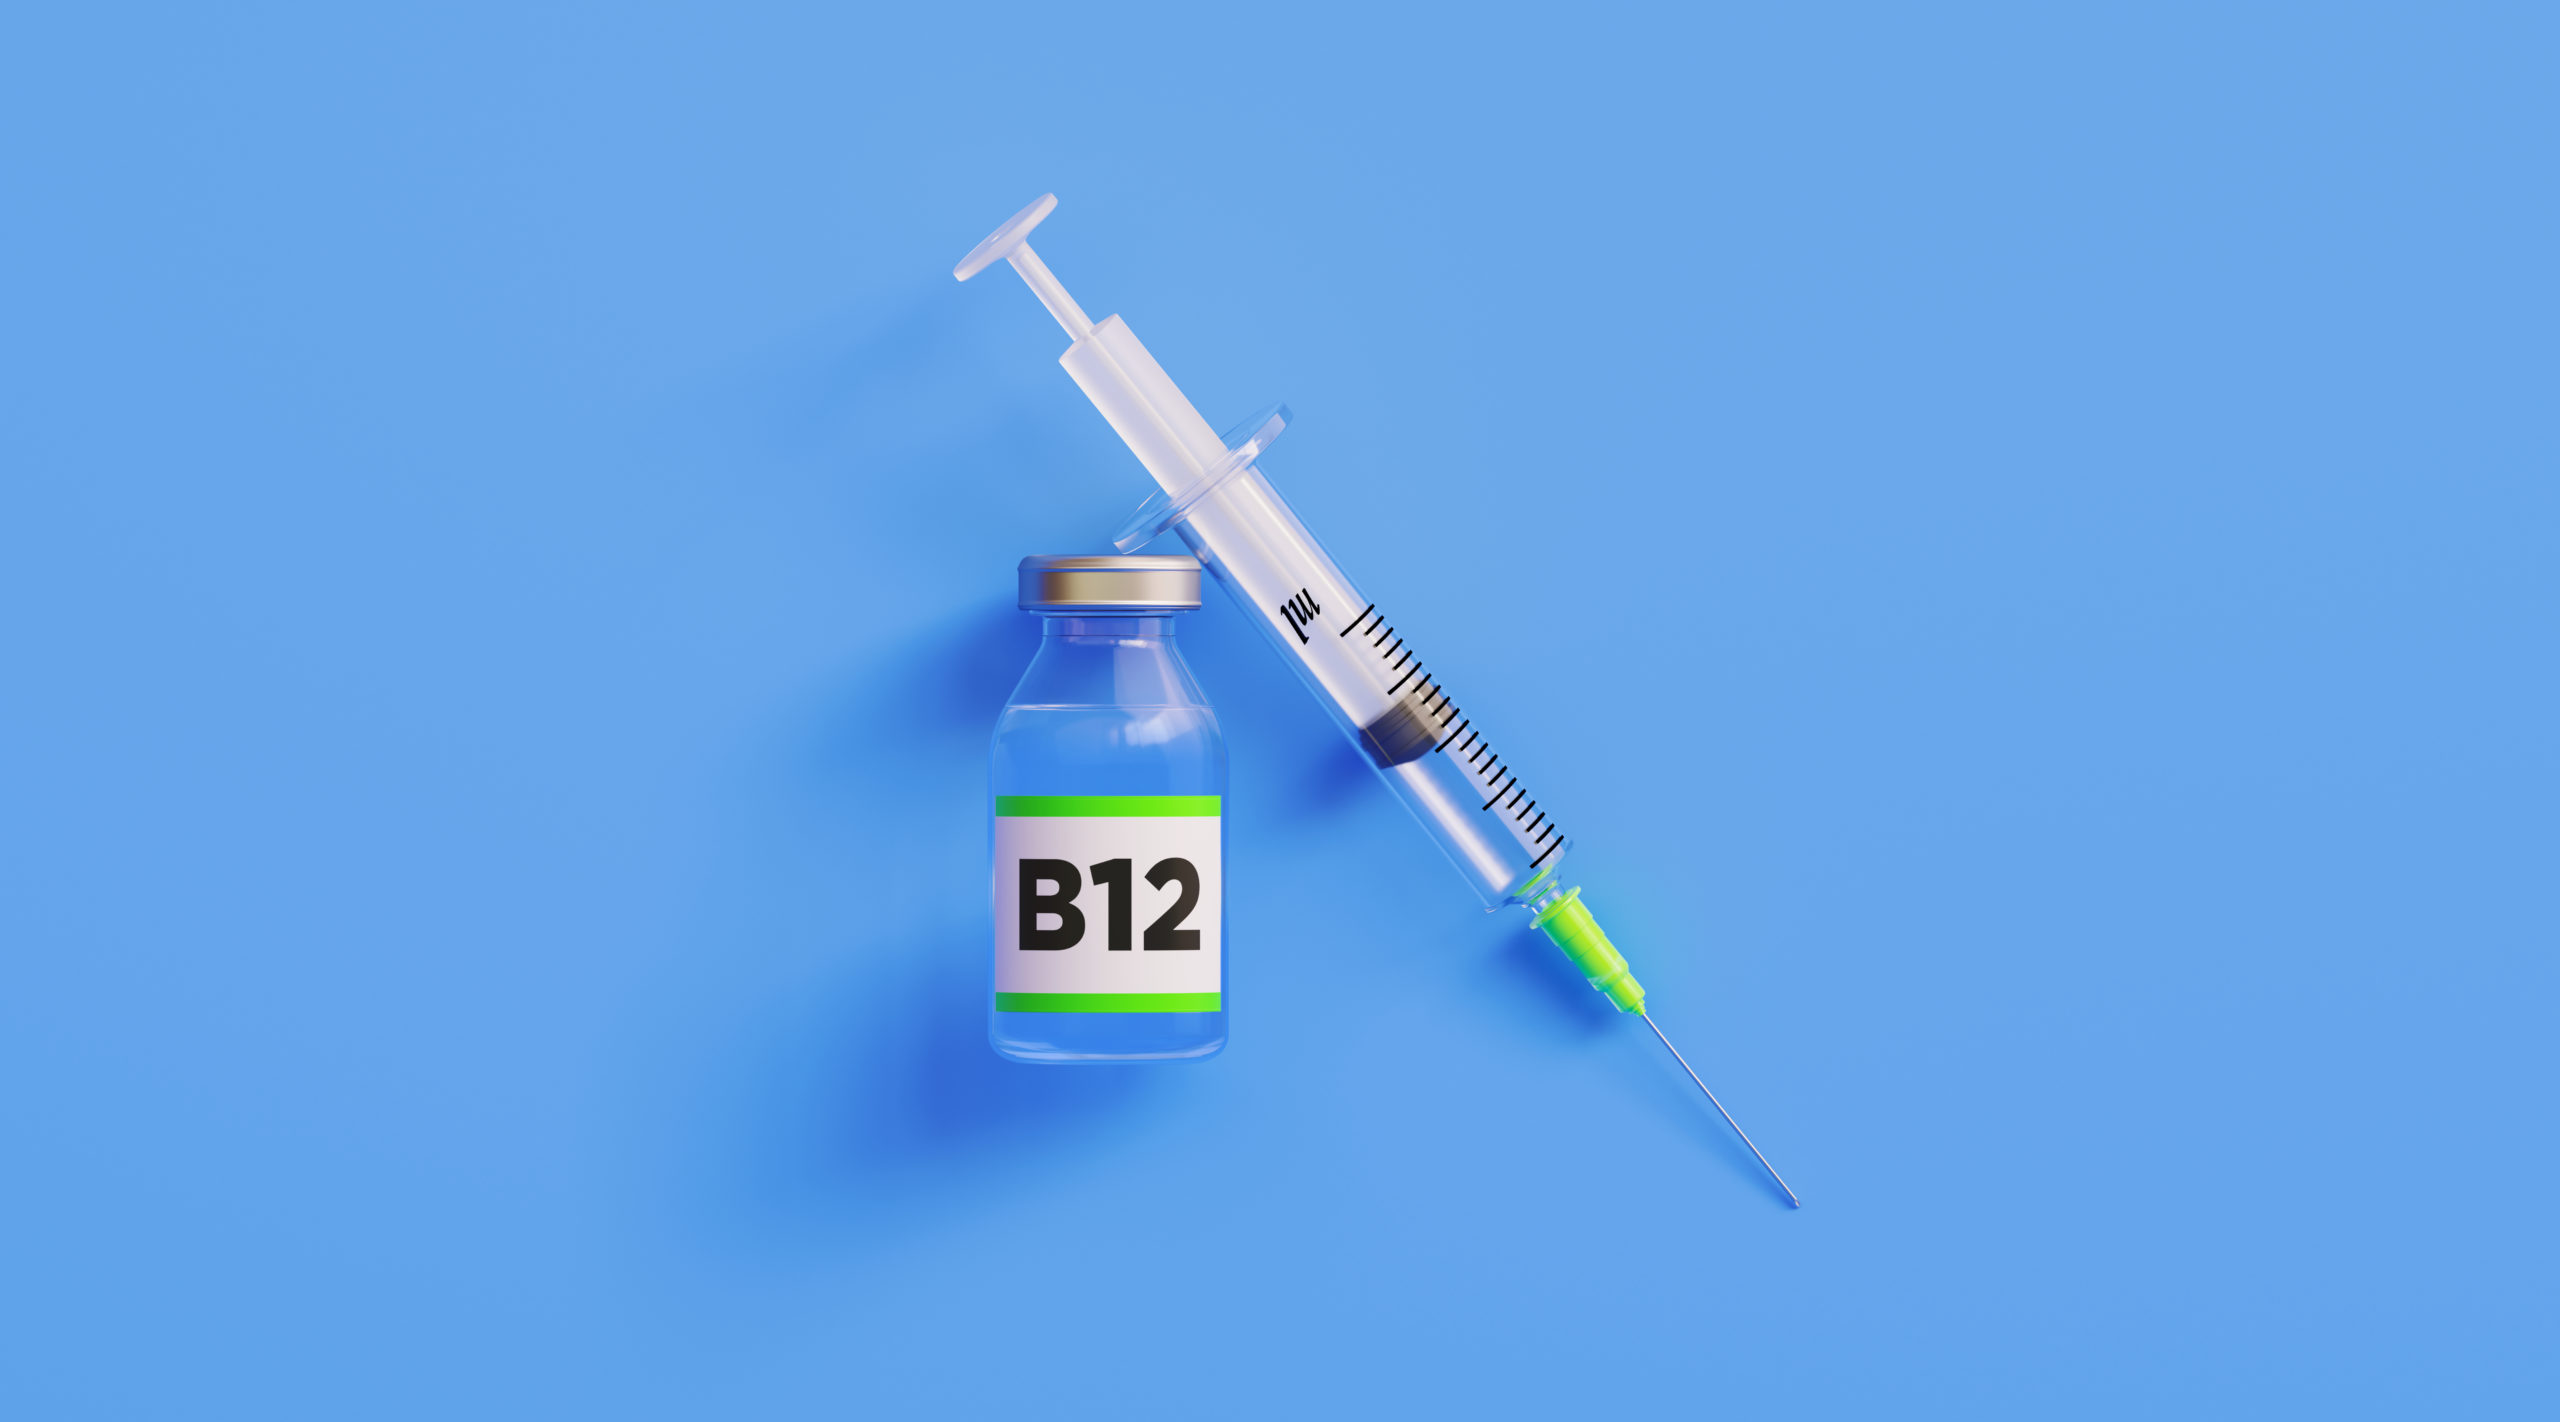 Injectable B12 Vitamin and Syringe on Blue Background.